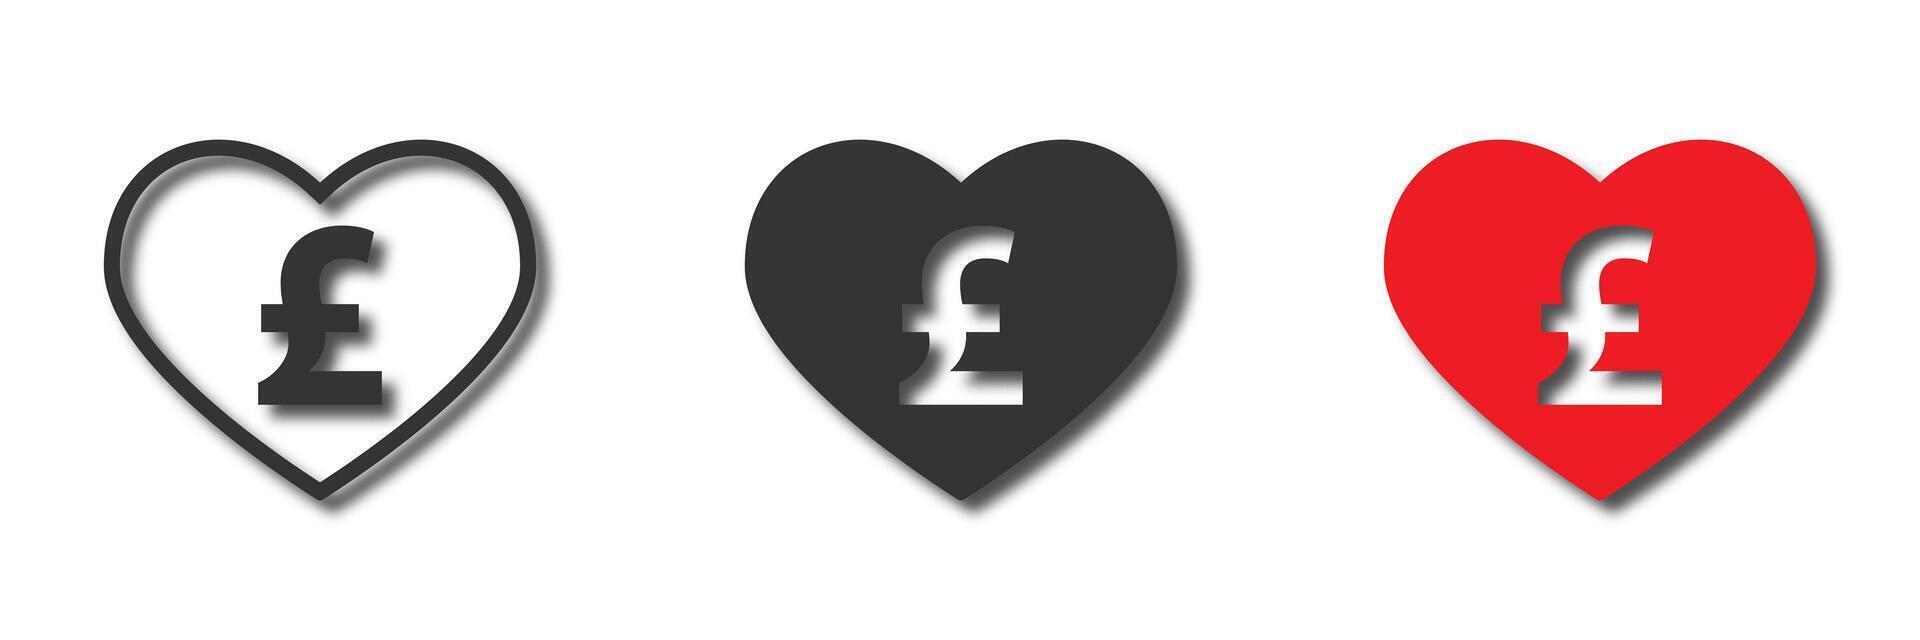 Heart icon with british currency sign inside. Vector illustration.